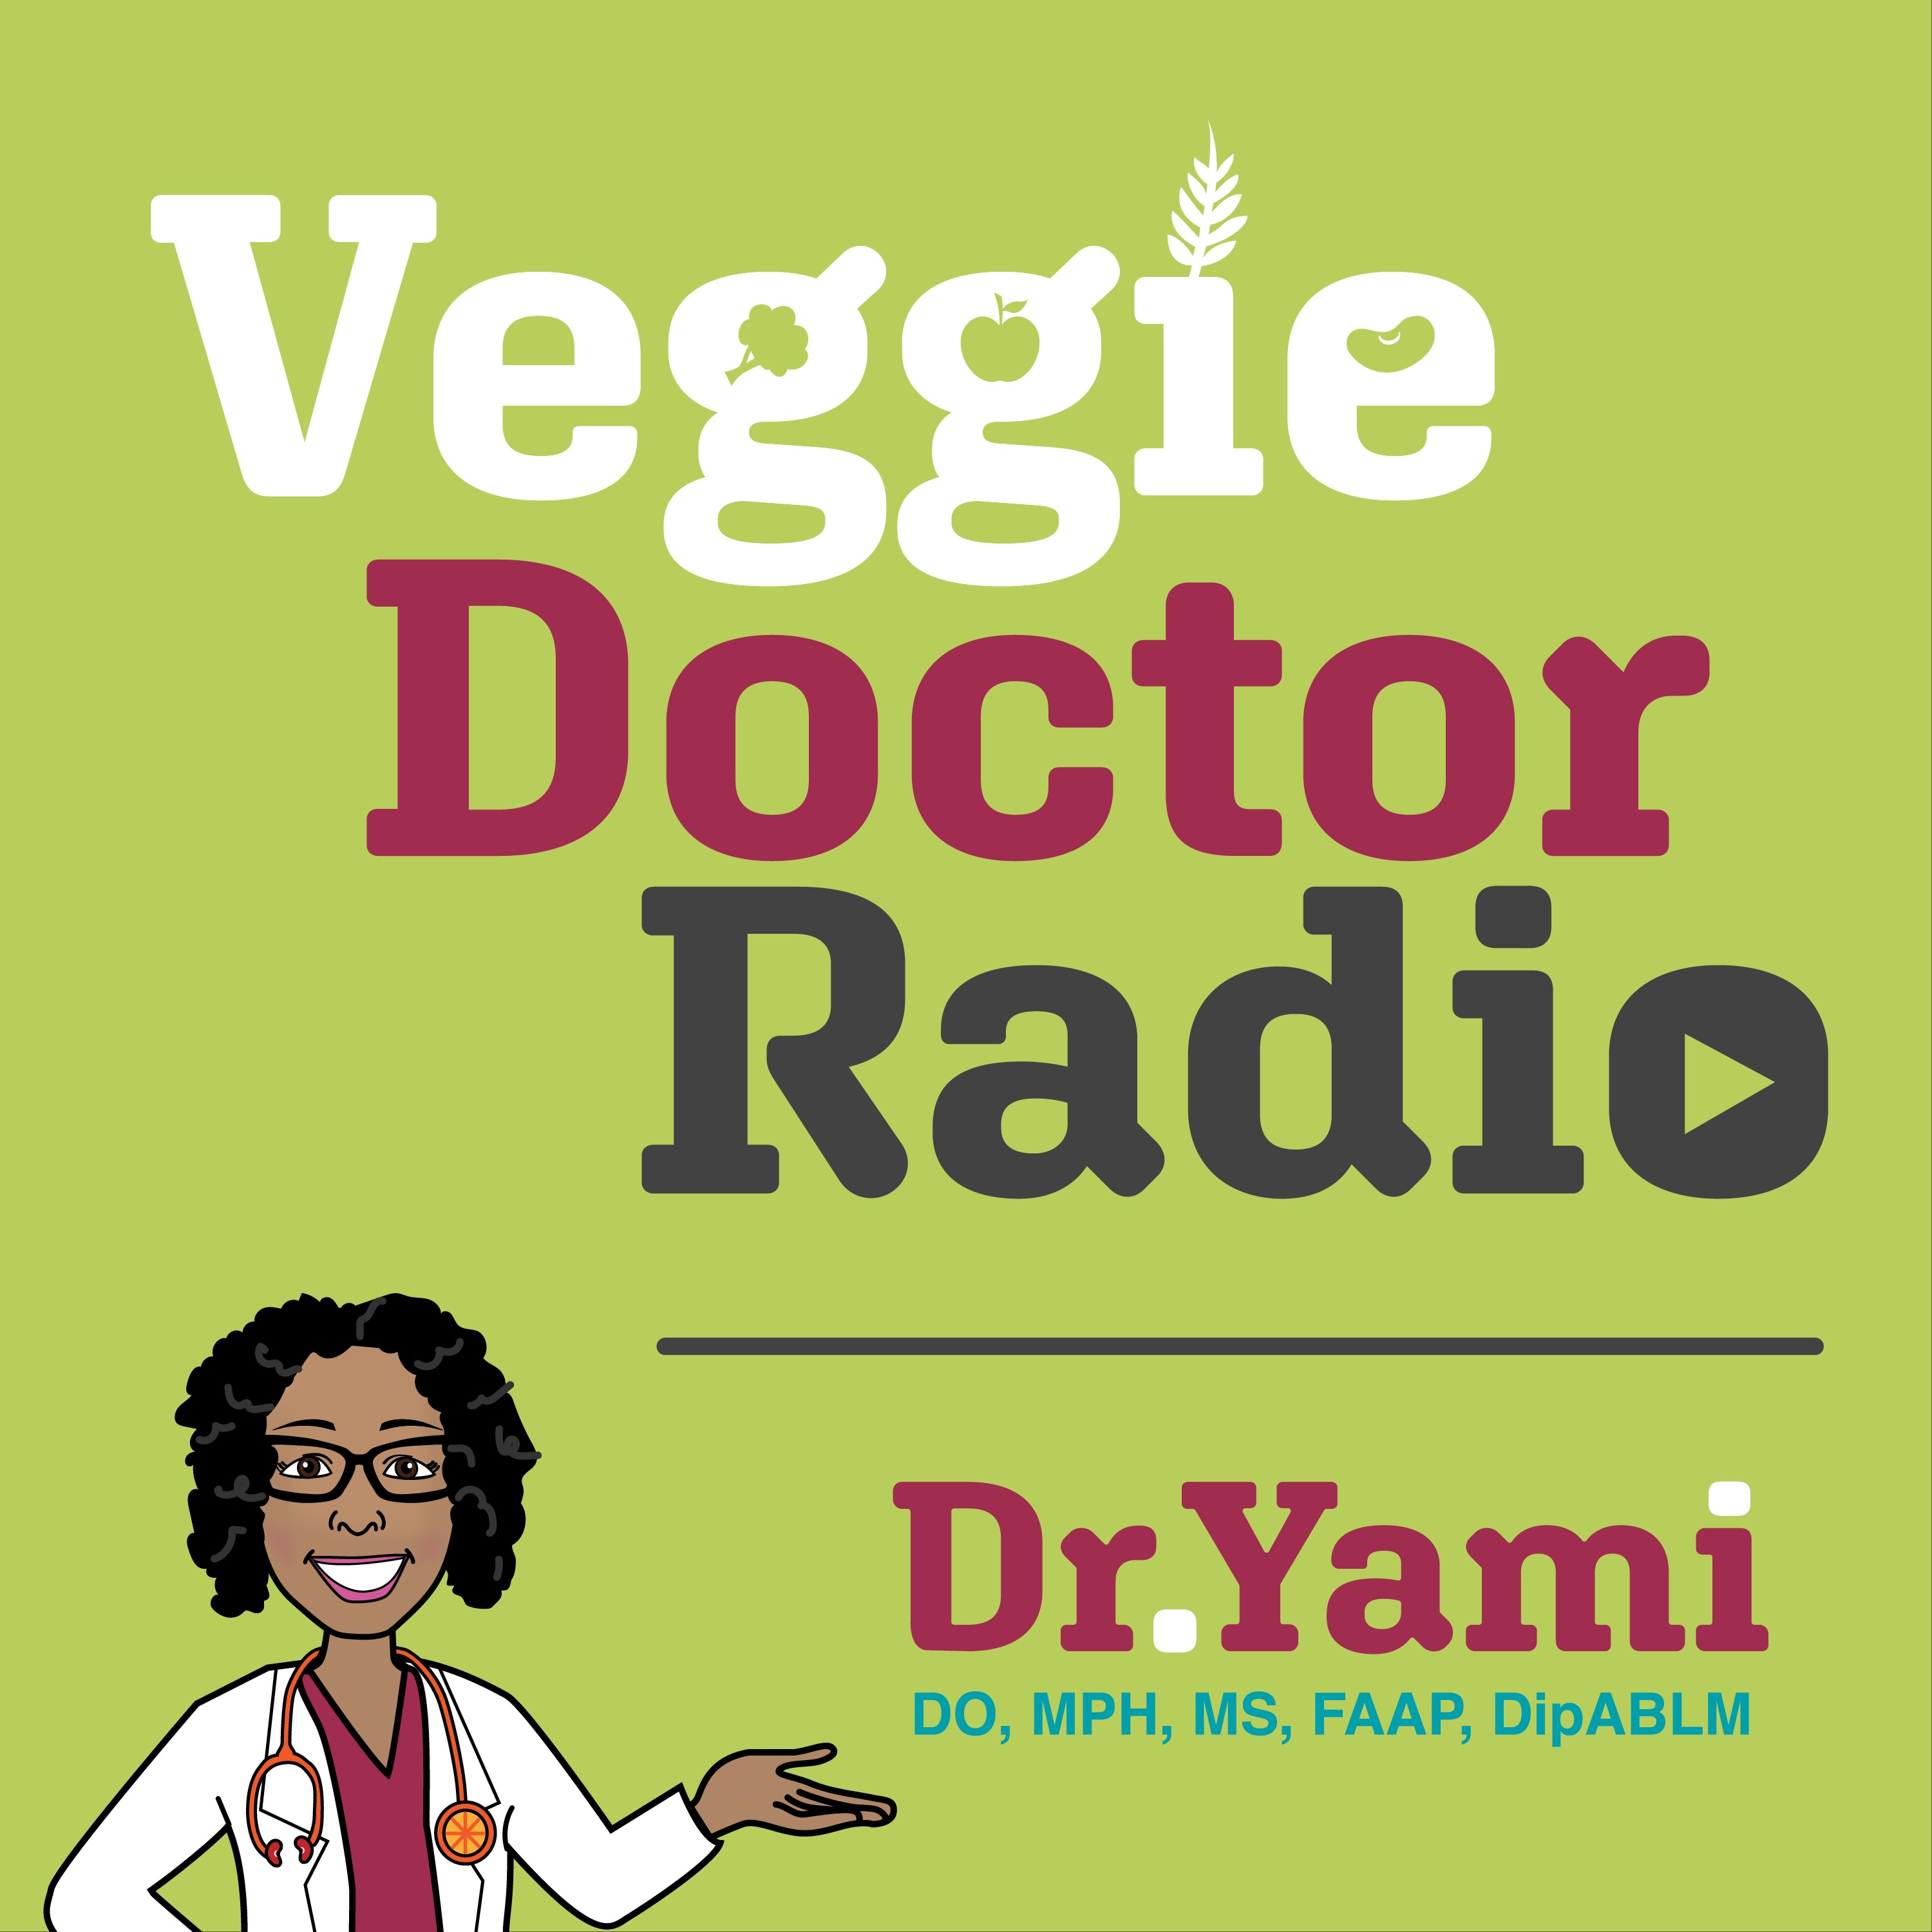 220: Things I would tell my younger self (Veggie Doctor Radio)